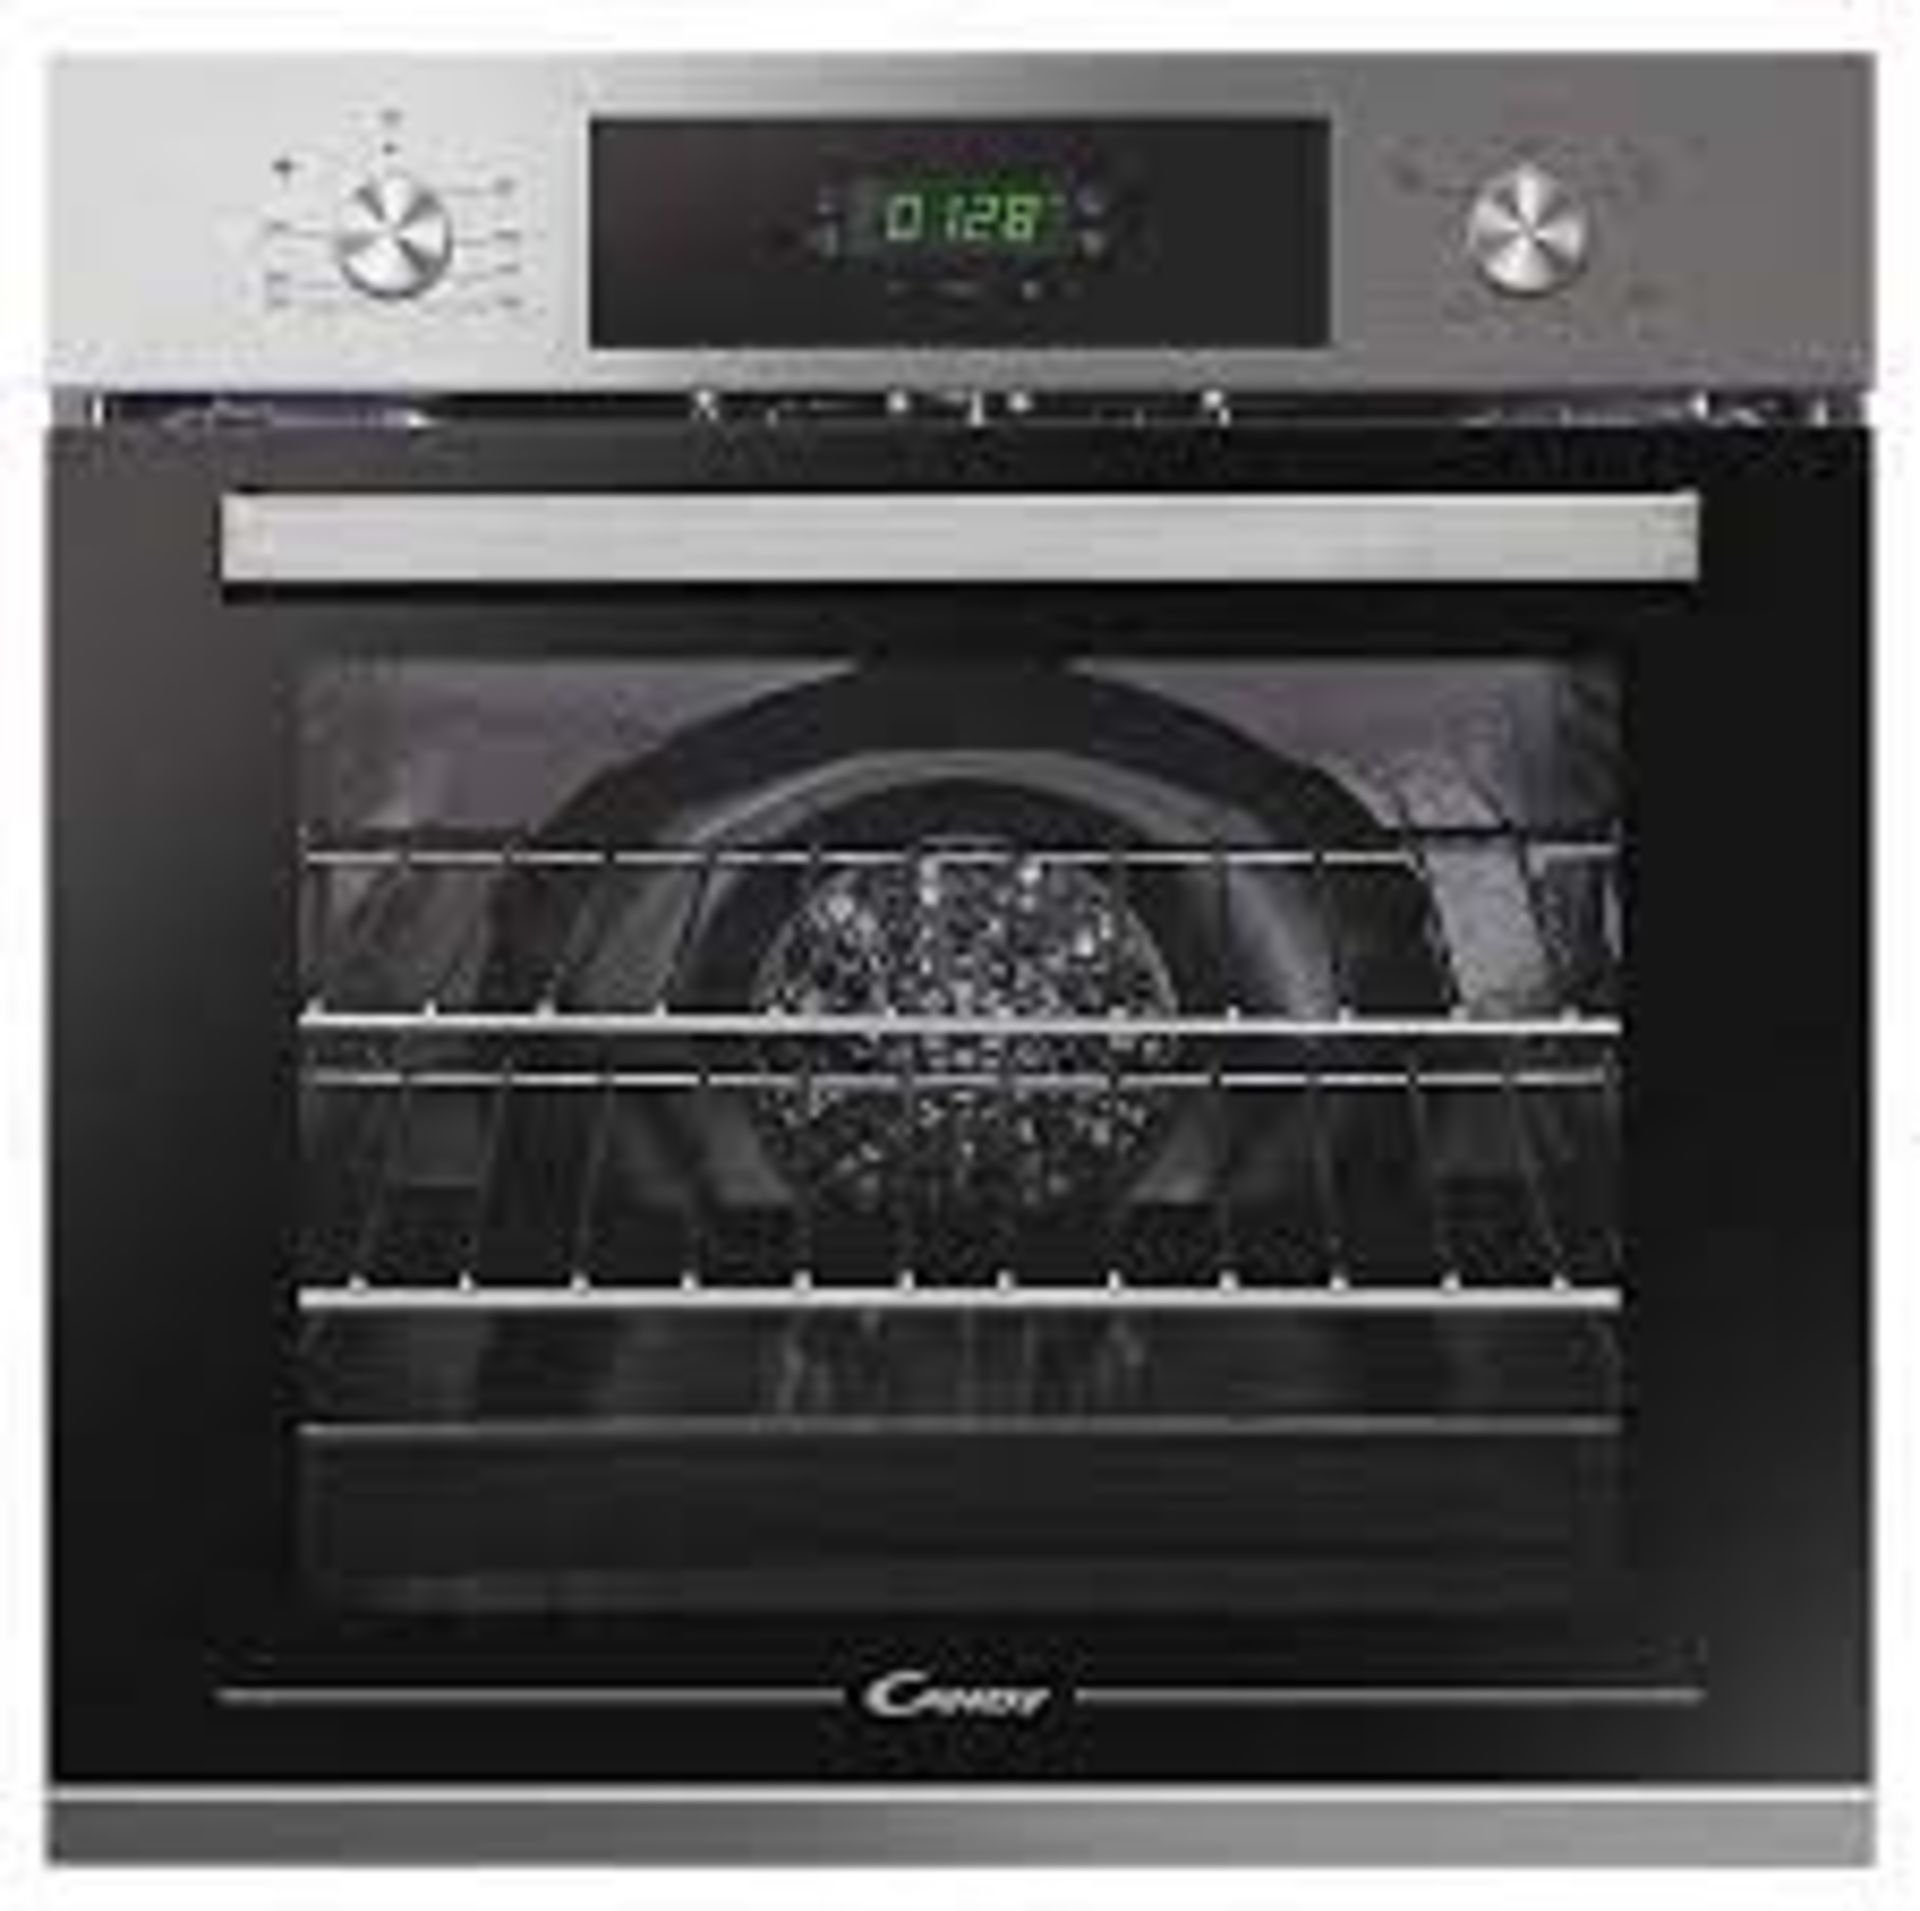 Candy FCT405X Single Electric Oven - Stainless Steel. -ER47. This Candy 60cm fan oven is ideal for